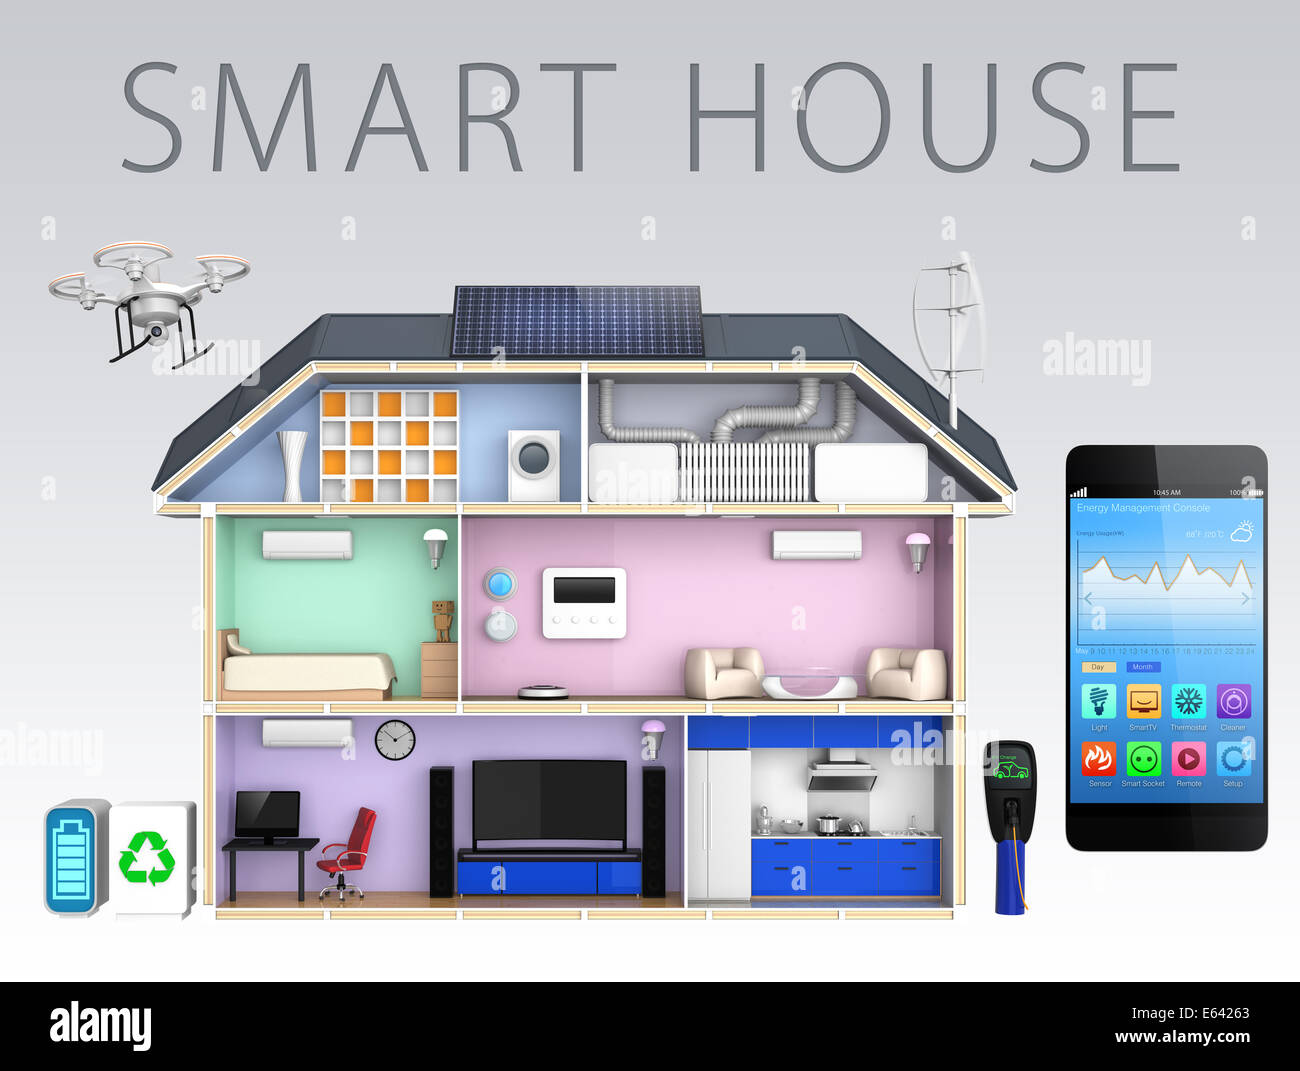 Smart house with energy efficient appliances, monitoring by smart phone. Stock Photo